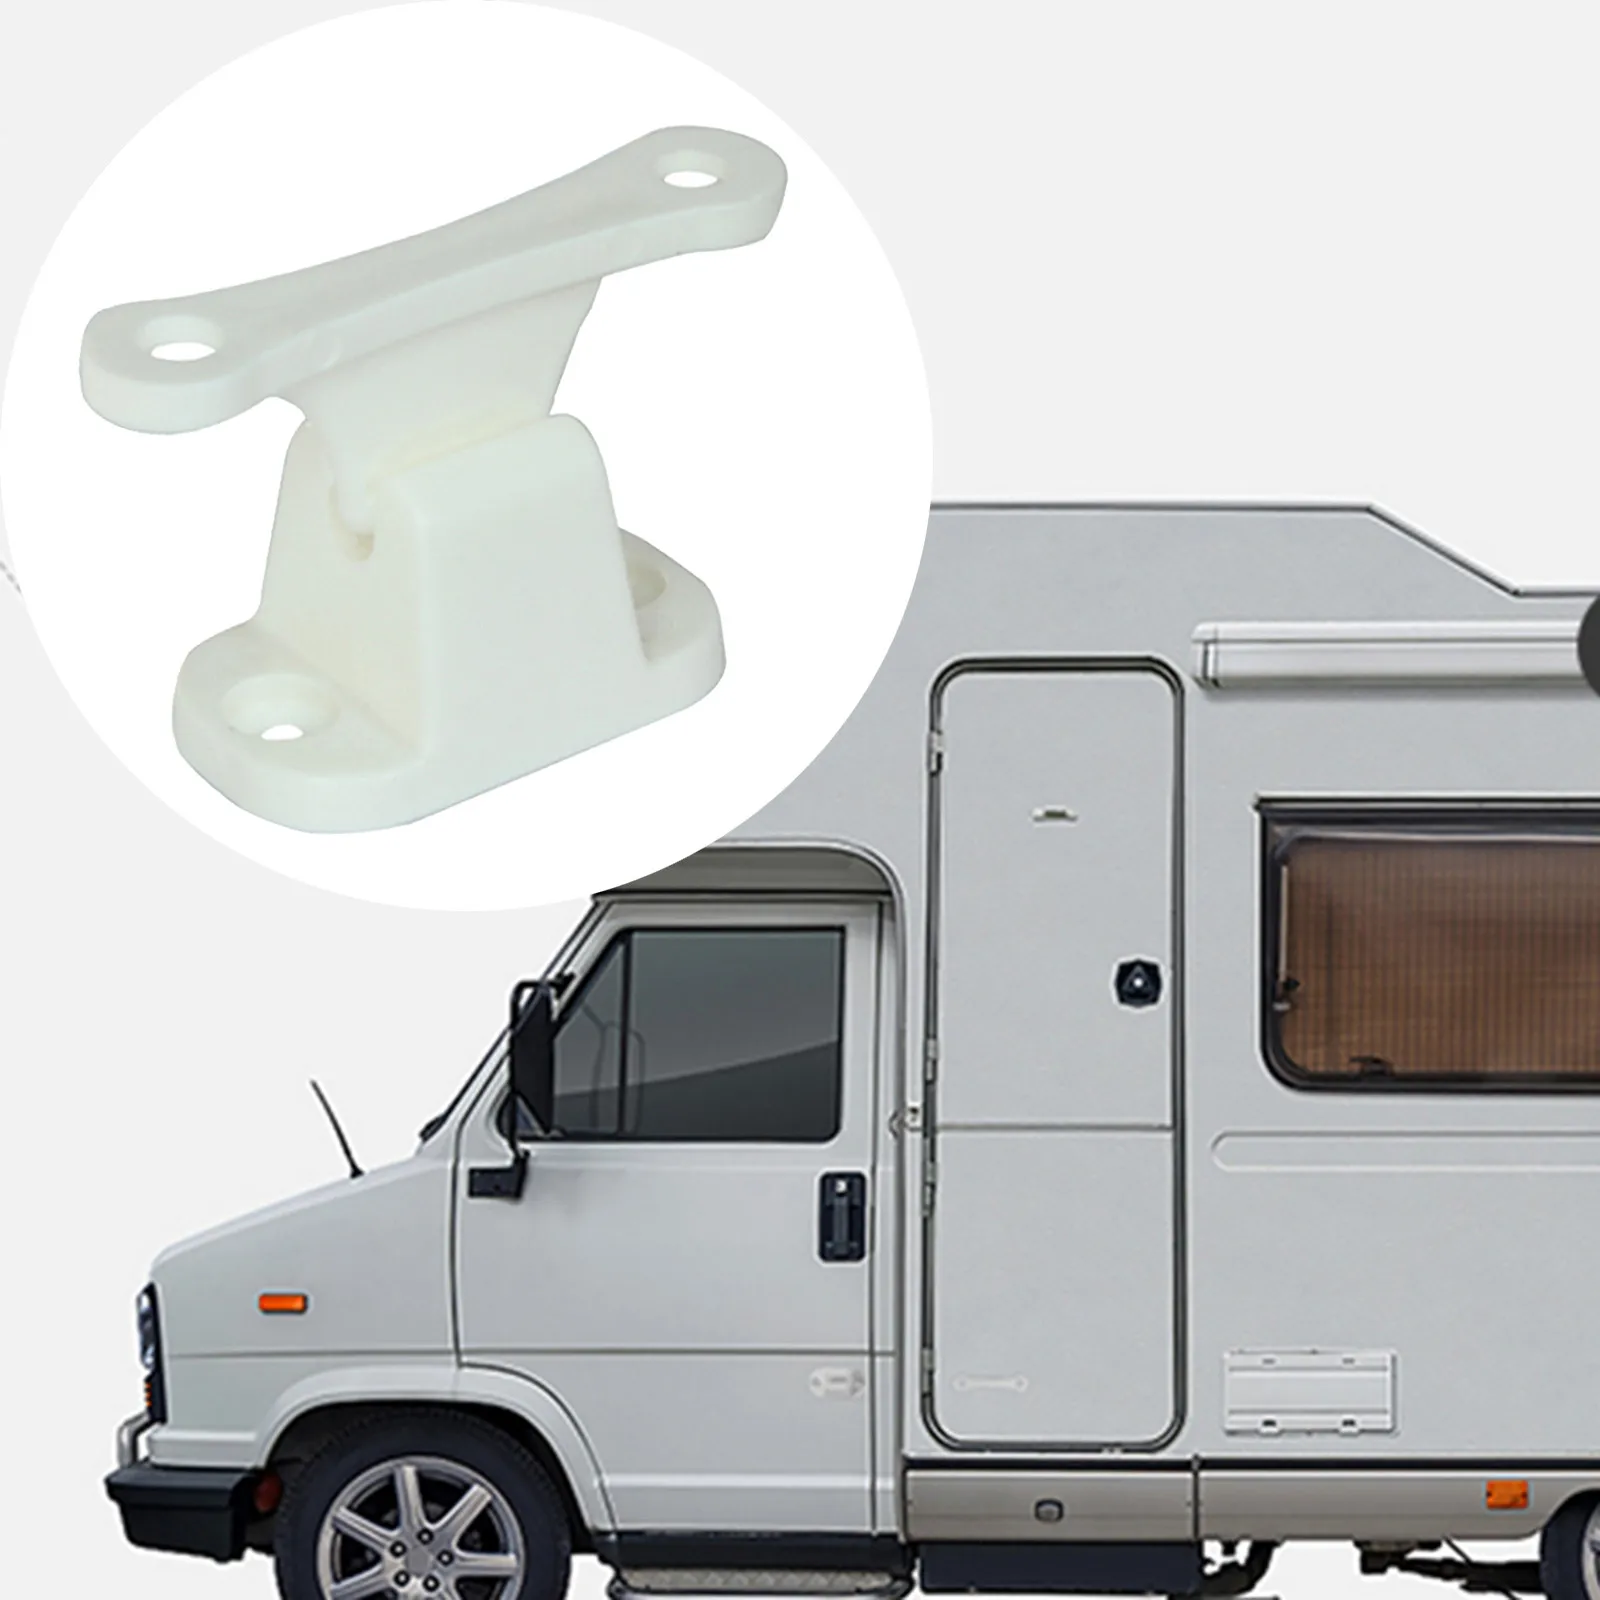 

1x Caravan Or Motorhome White Plastic Main Door Catch Retainer Holder Brand New And High Quality Auto Clips For Swift/ Elddis